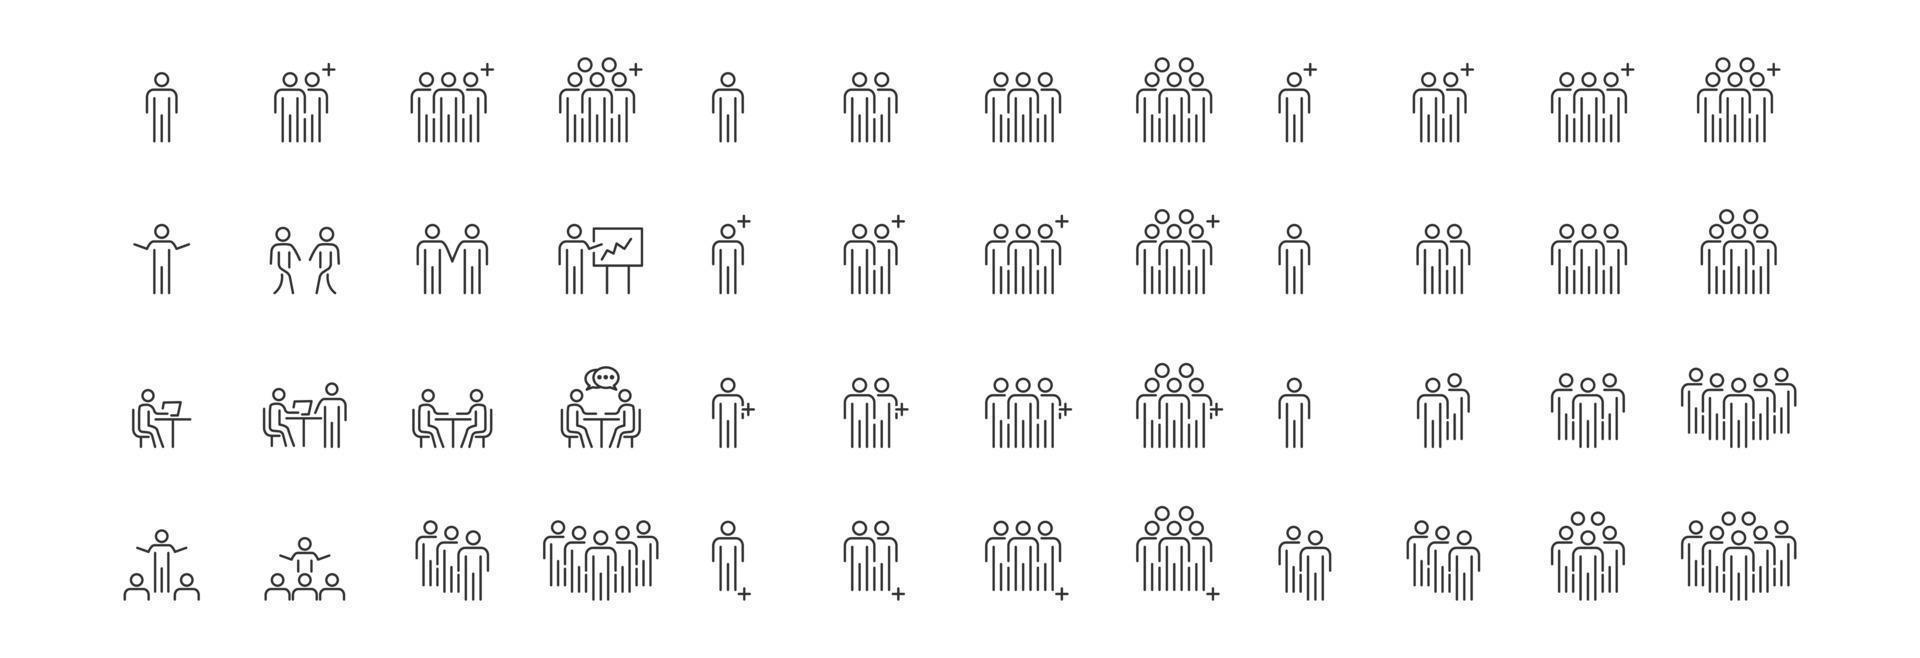 People Icons Line work group Team Vector, Business Meeting Communication. vector